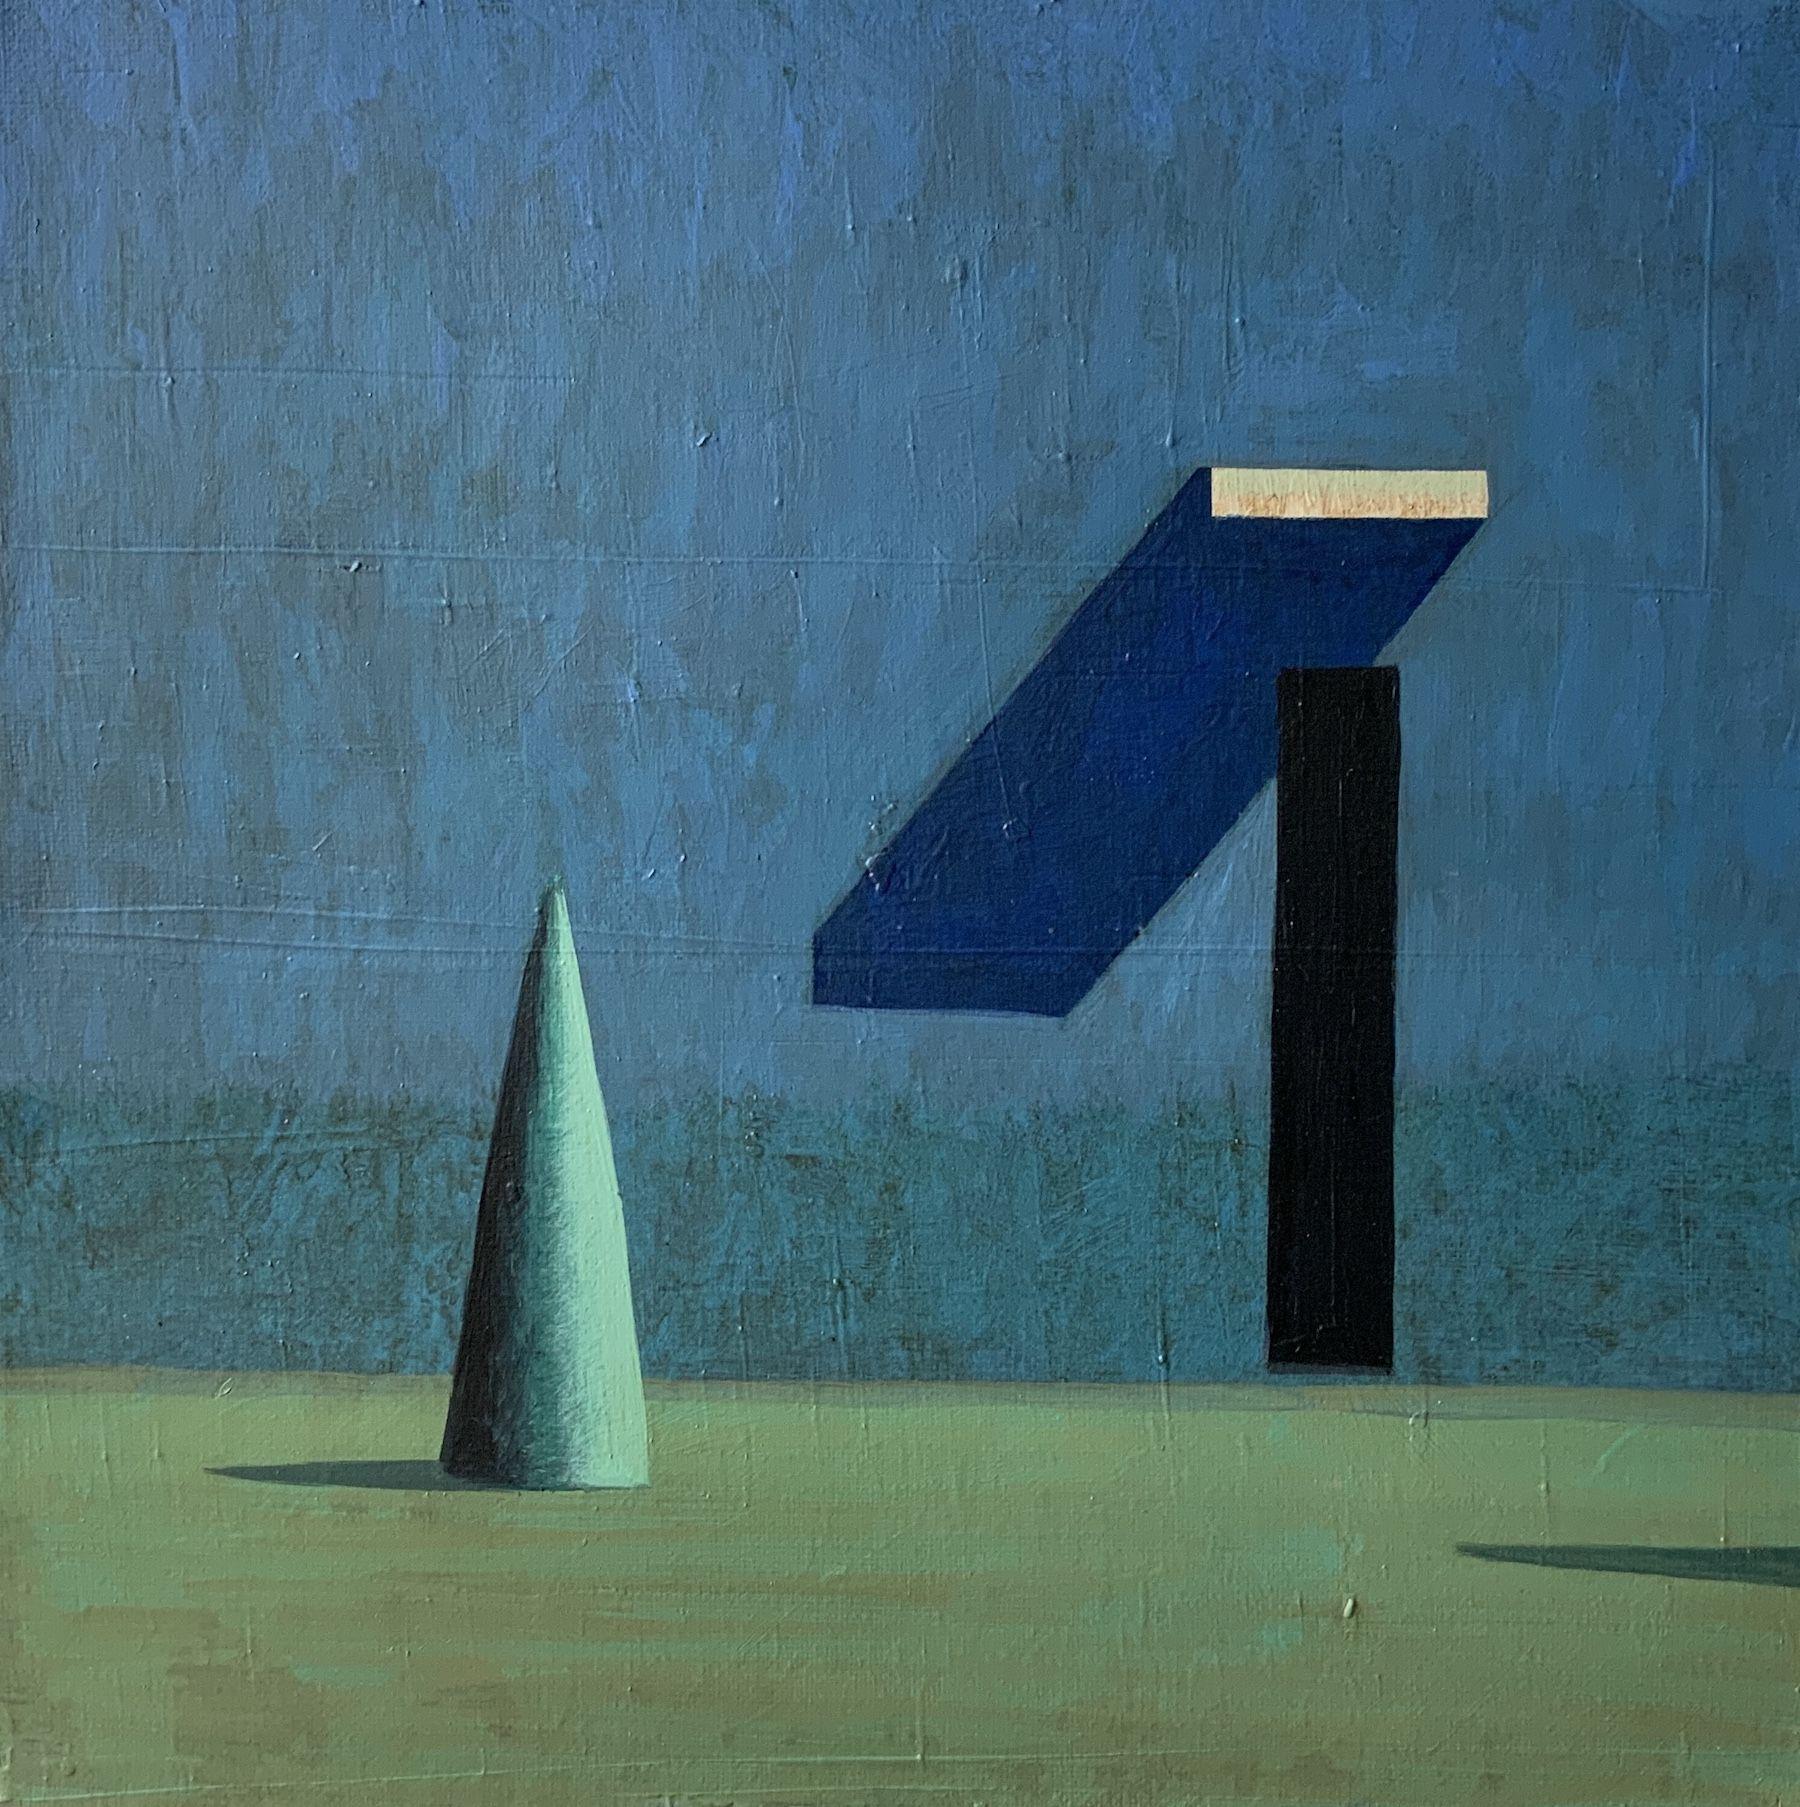 GA-BLA by Spanish contemporary artist Ramon Enrich. 
Acrylic on canvas, 30 cm x 30 cm.

In these paintings, the artist establishes a conversation between architecture and landscape in a figurative work boasting geometric shapes and an enigmatic